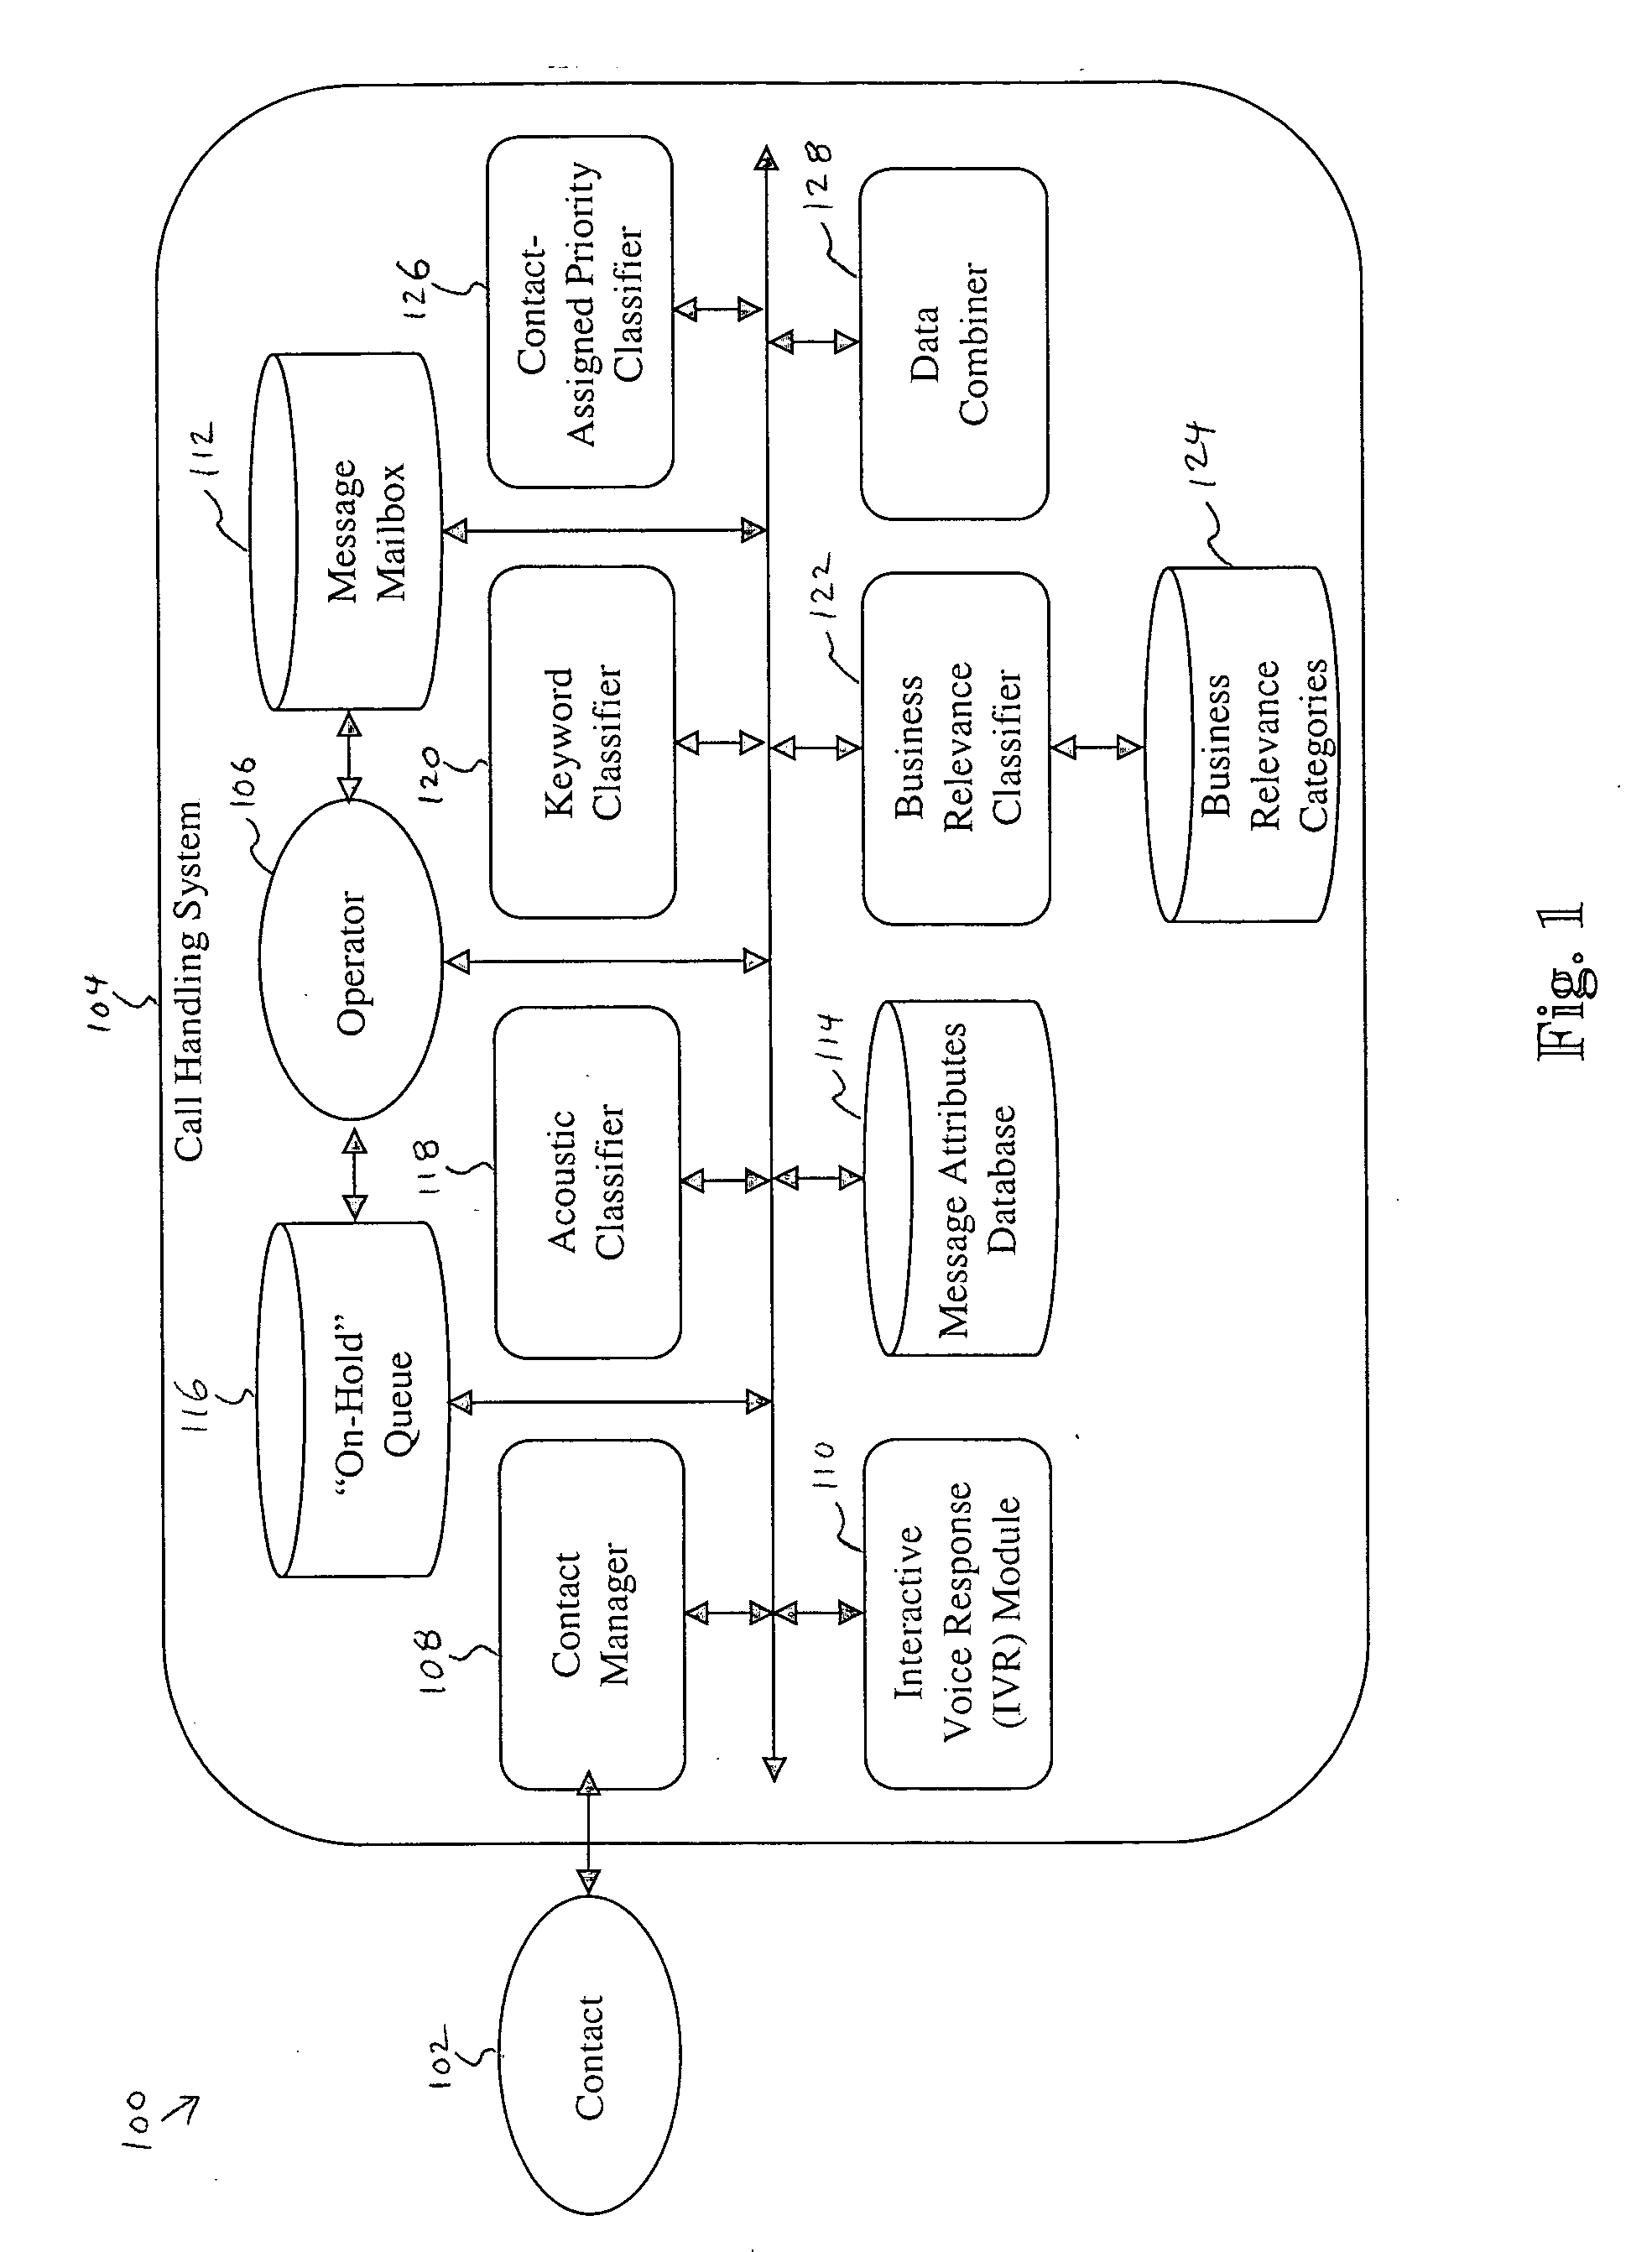 System and method for prioritizing contacts